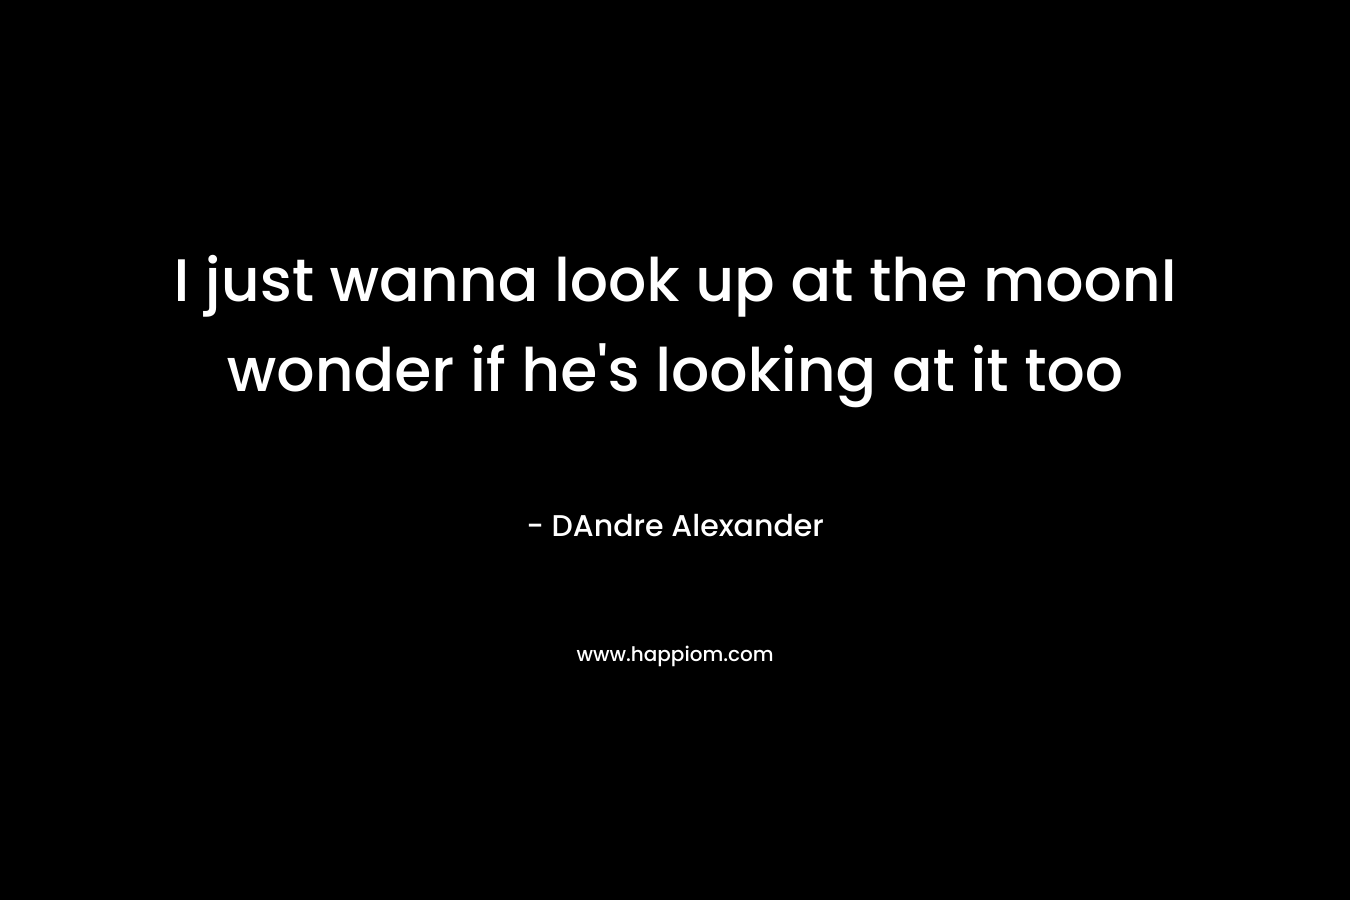 I just wanna look up at the moonI wonder if he’s looking at it too – DAndre Alexander